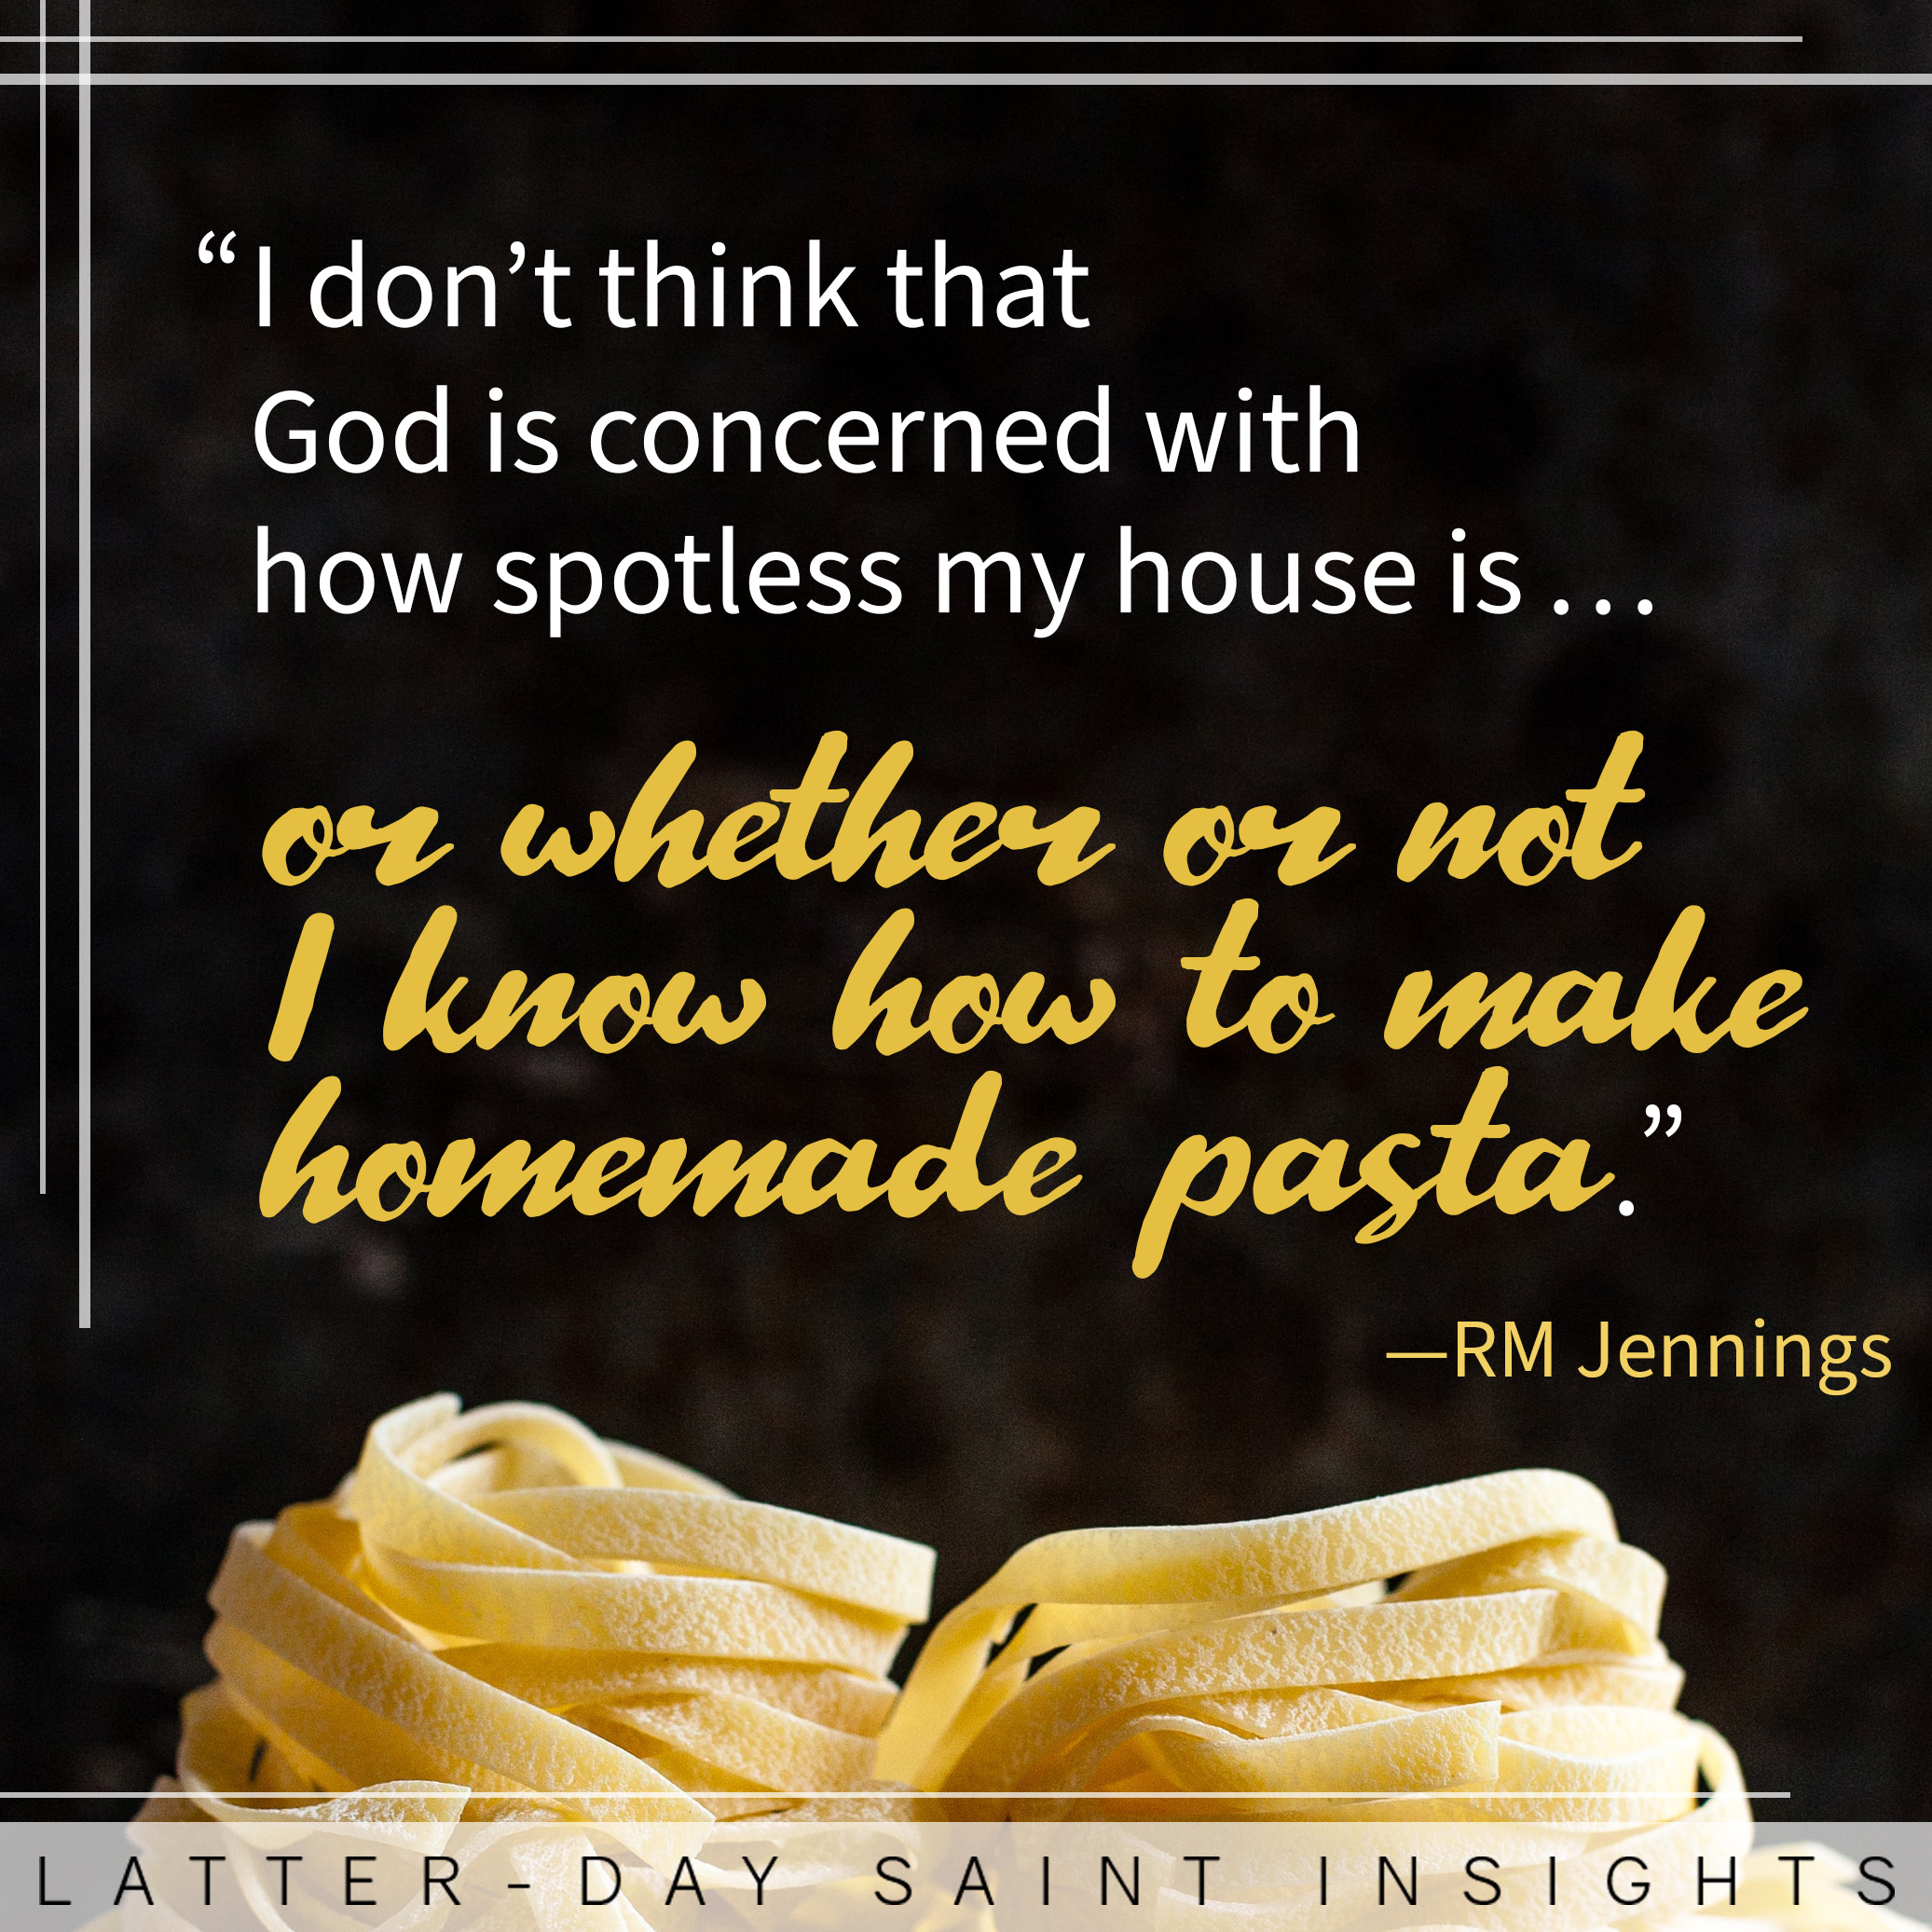 A plate of pasta against a black background with a quote by R.M Jennings that says, "I don't think that God is concerned with how spotless my house it...or whether or not I knew how to make homemade pasta."